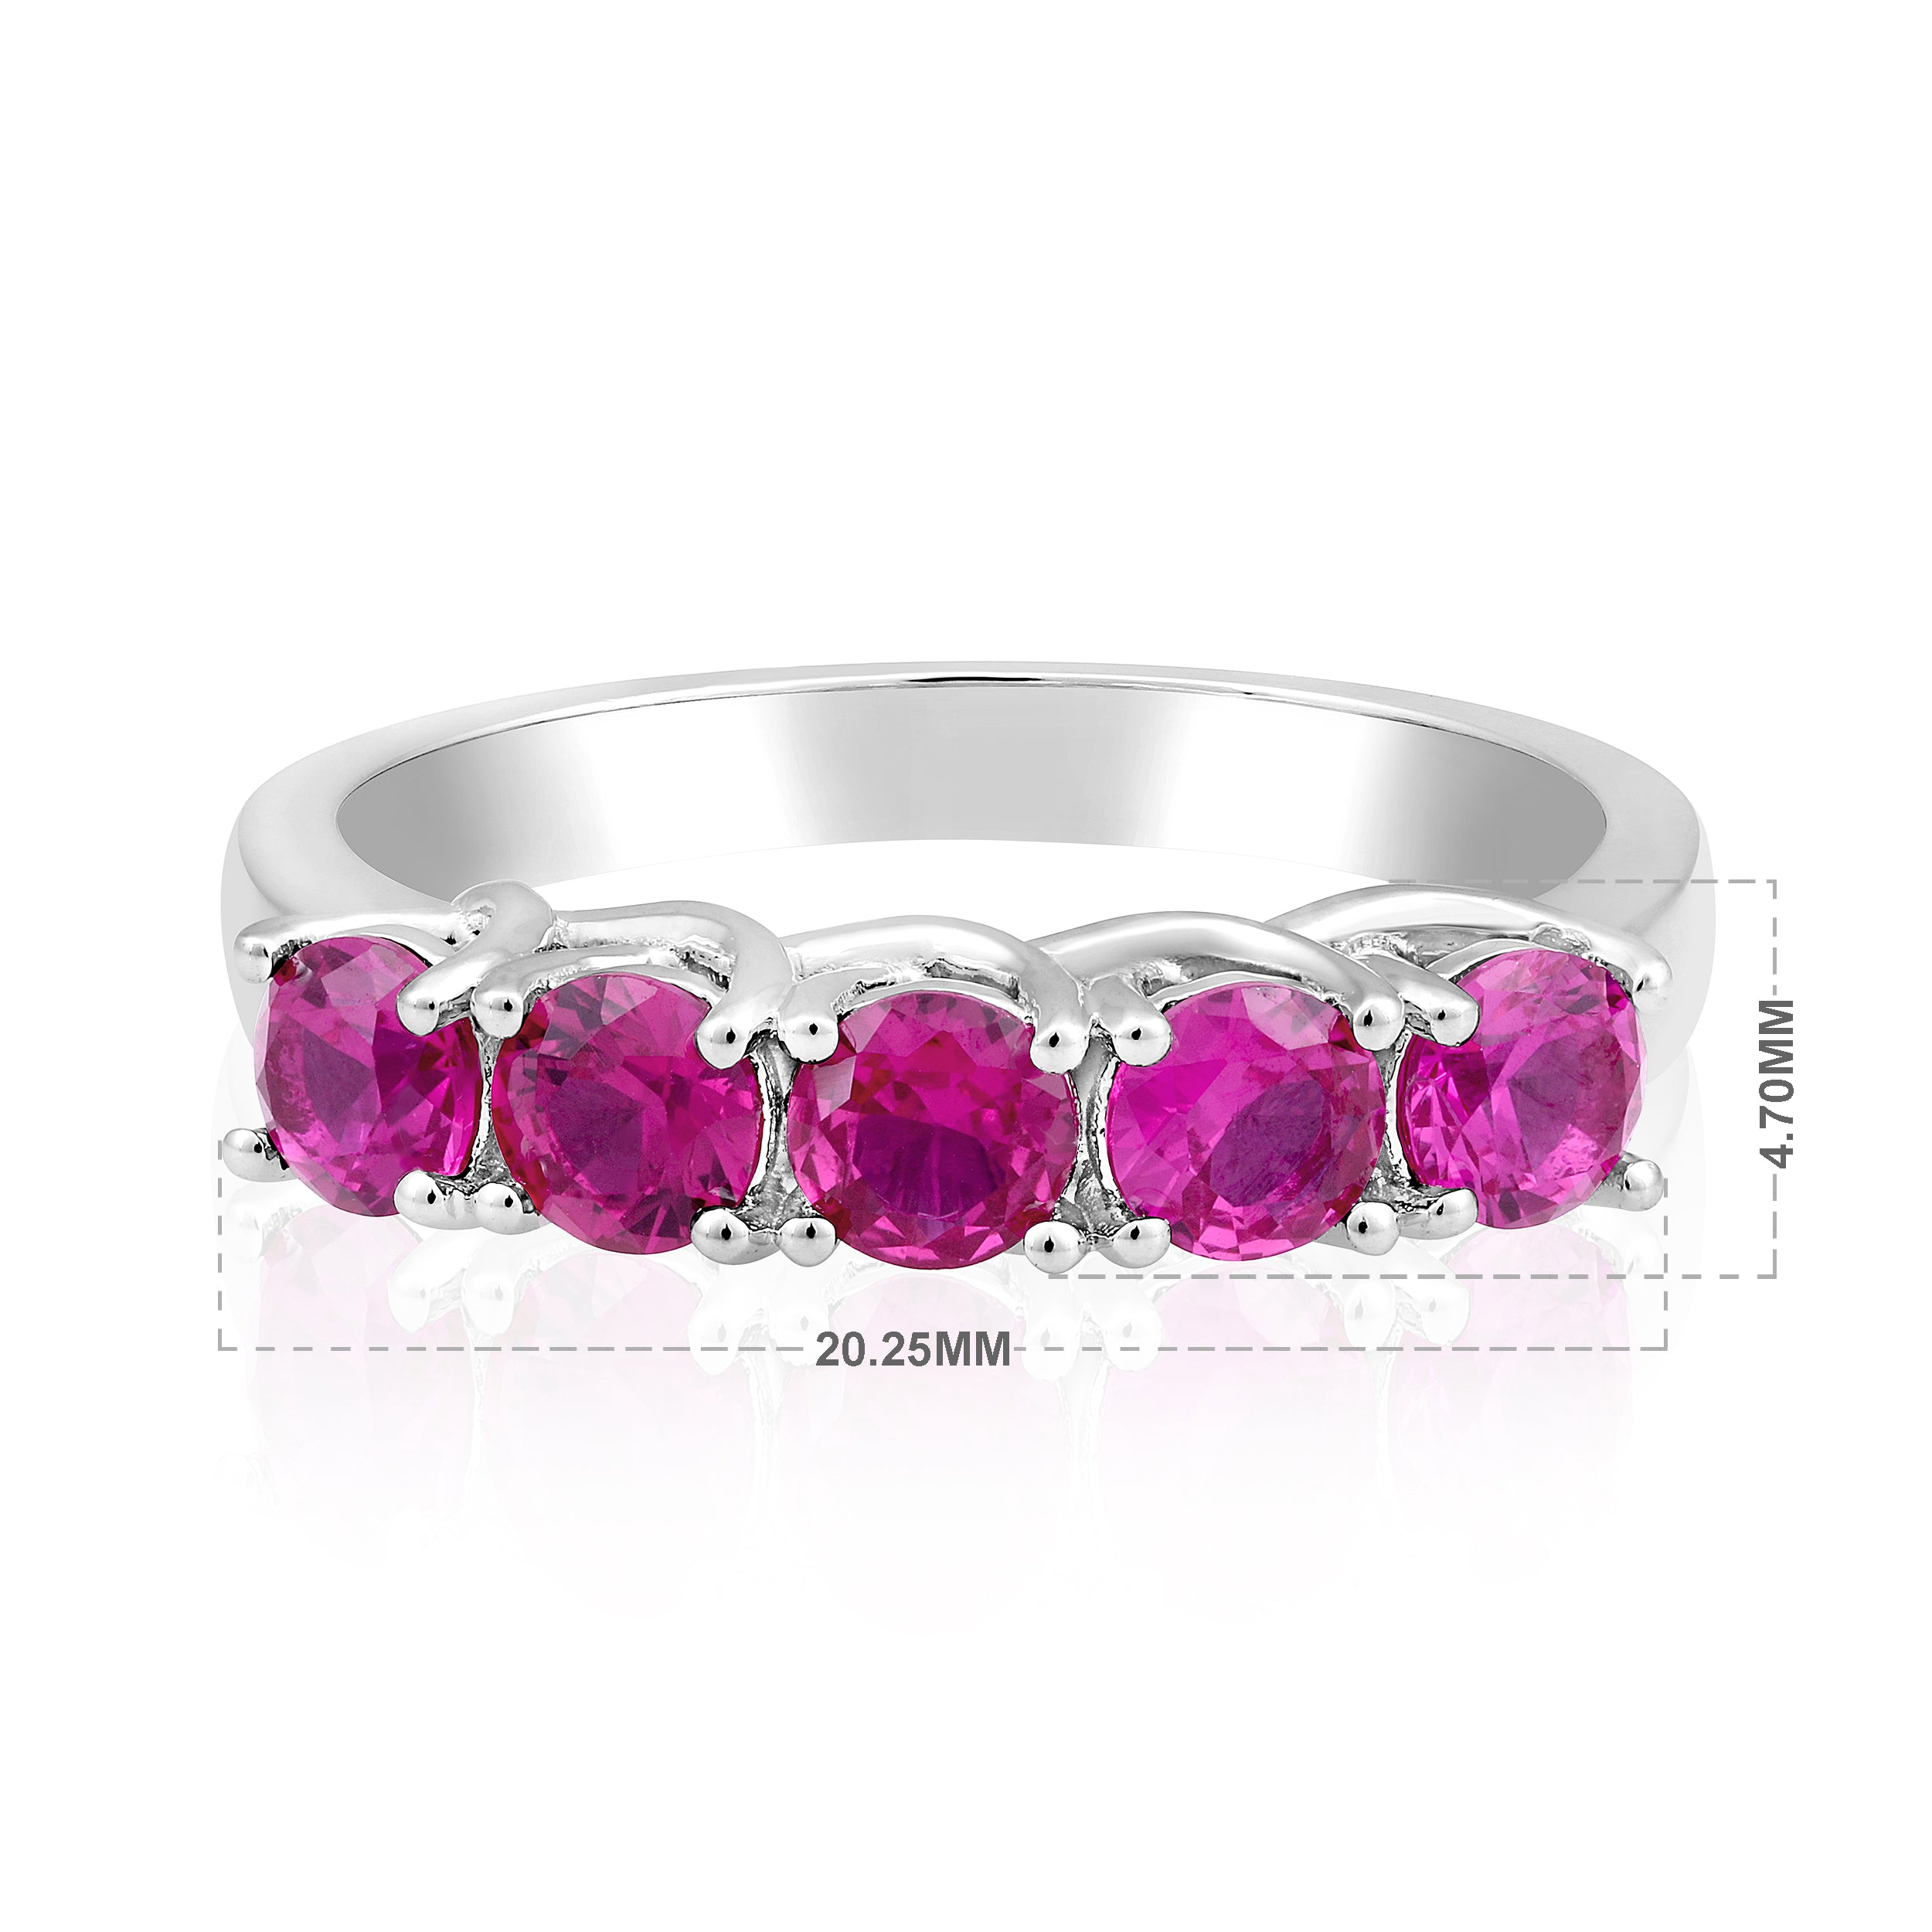 Certified 14K Gold 1.21ct Simulated Pink Ruby Designer 5 Stone Prong Band White Ring